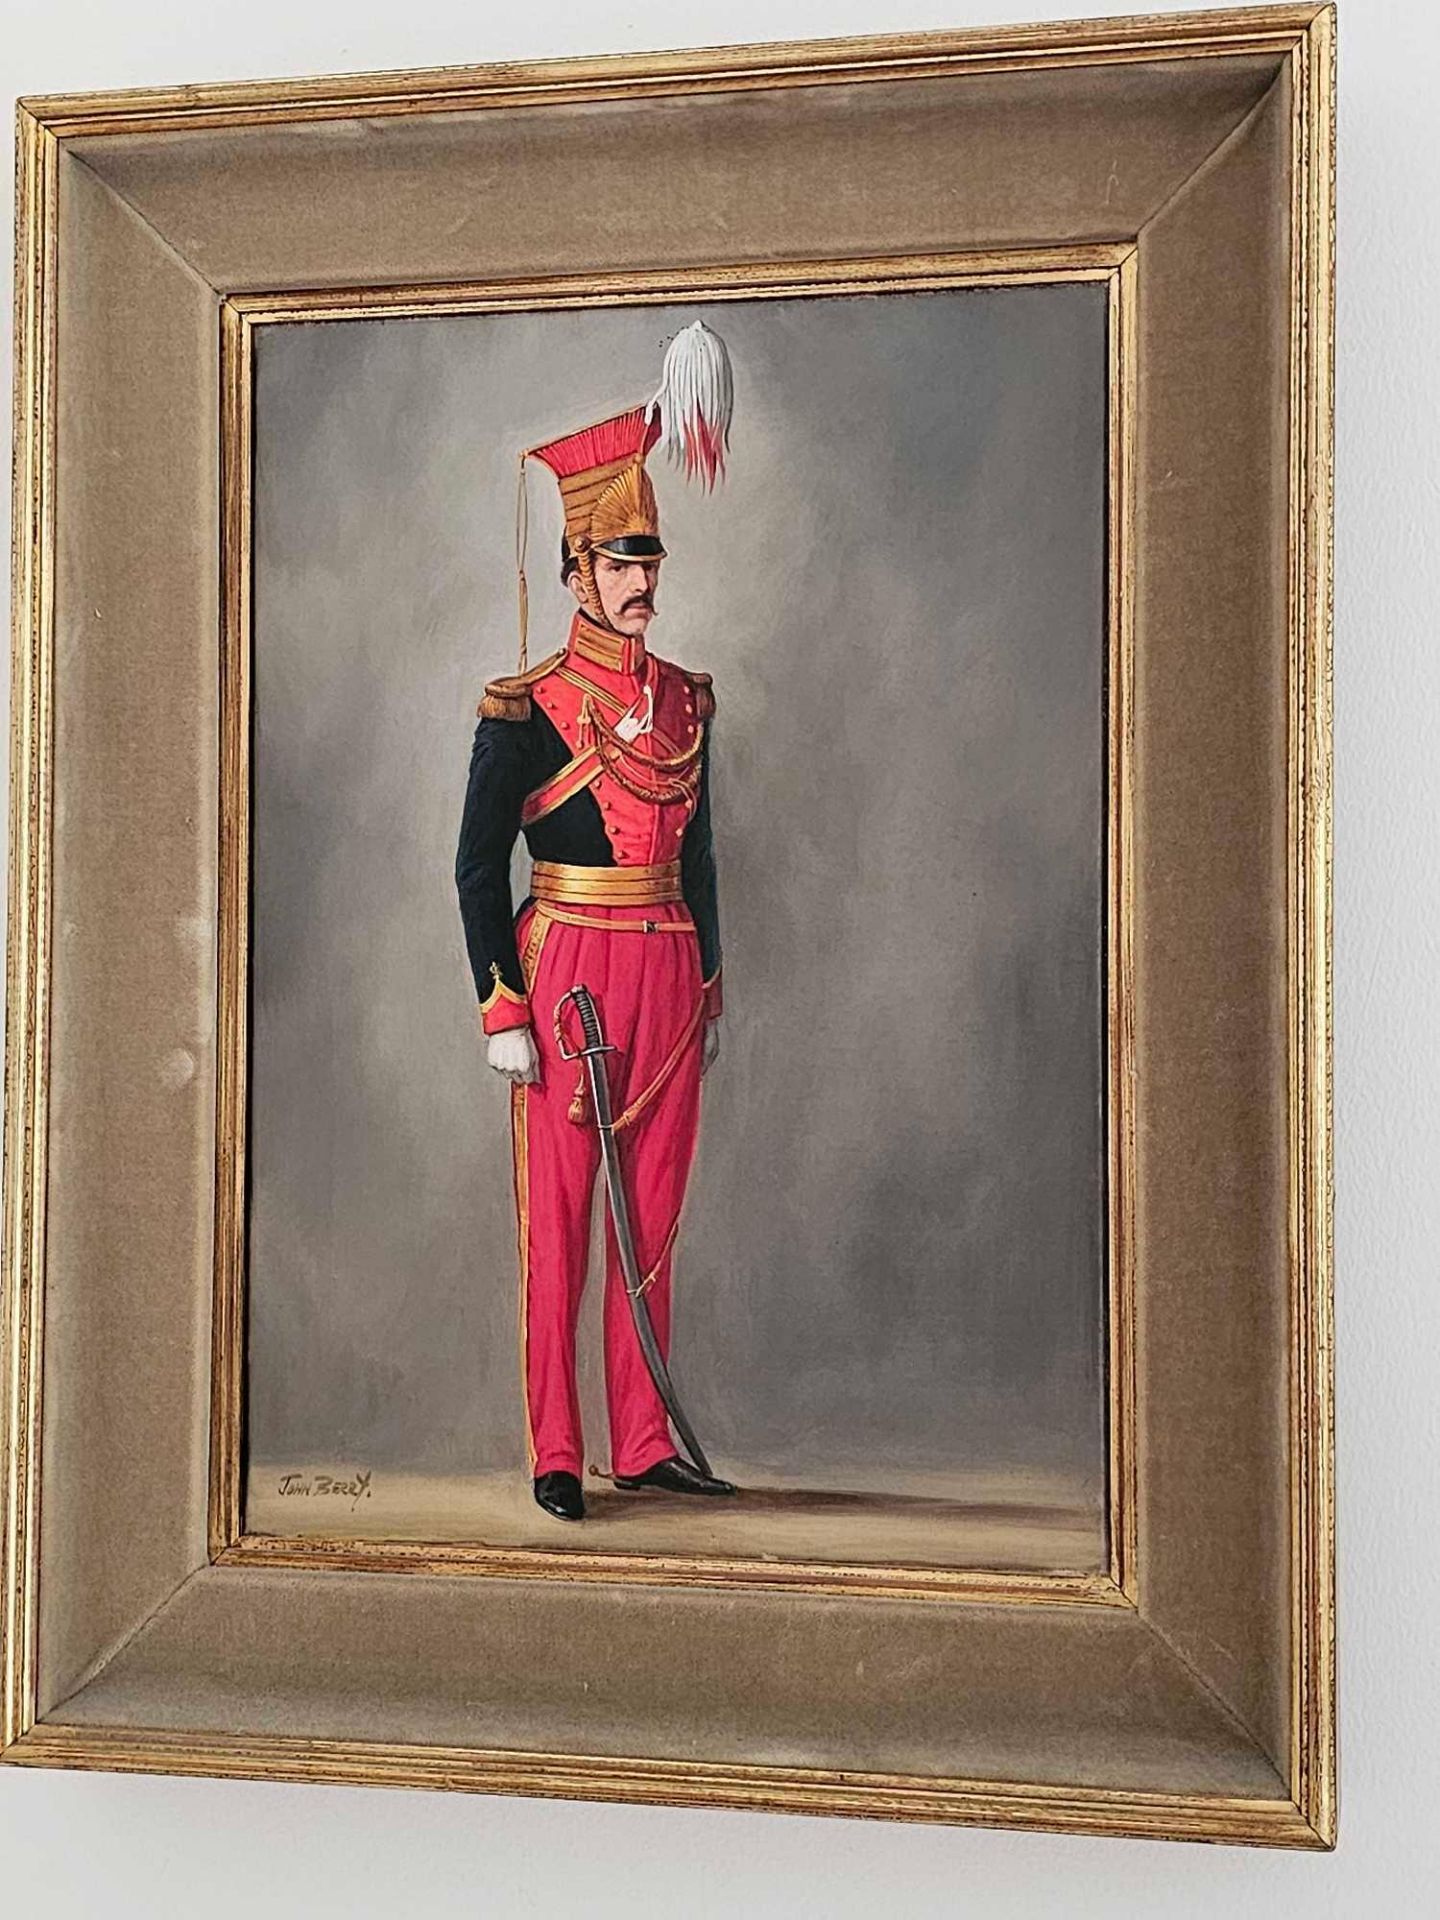 John Berry (1920 - 2009) Oil On Canvas Portrait Of An Officer Of The 12th Lancers 1820 Framed 37 X - Bild 2 aus 2